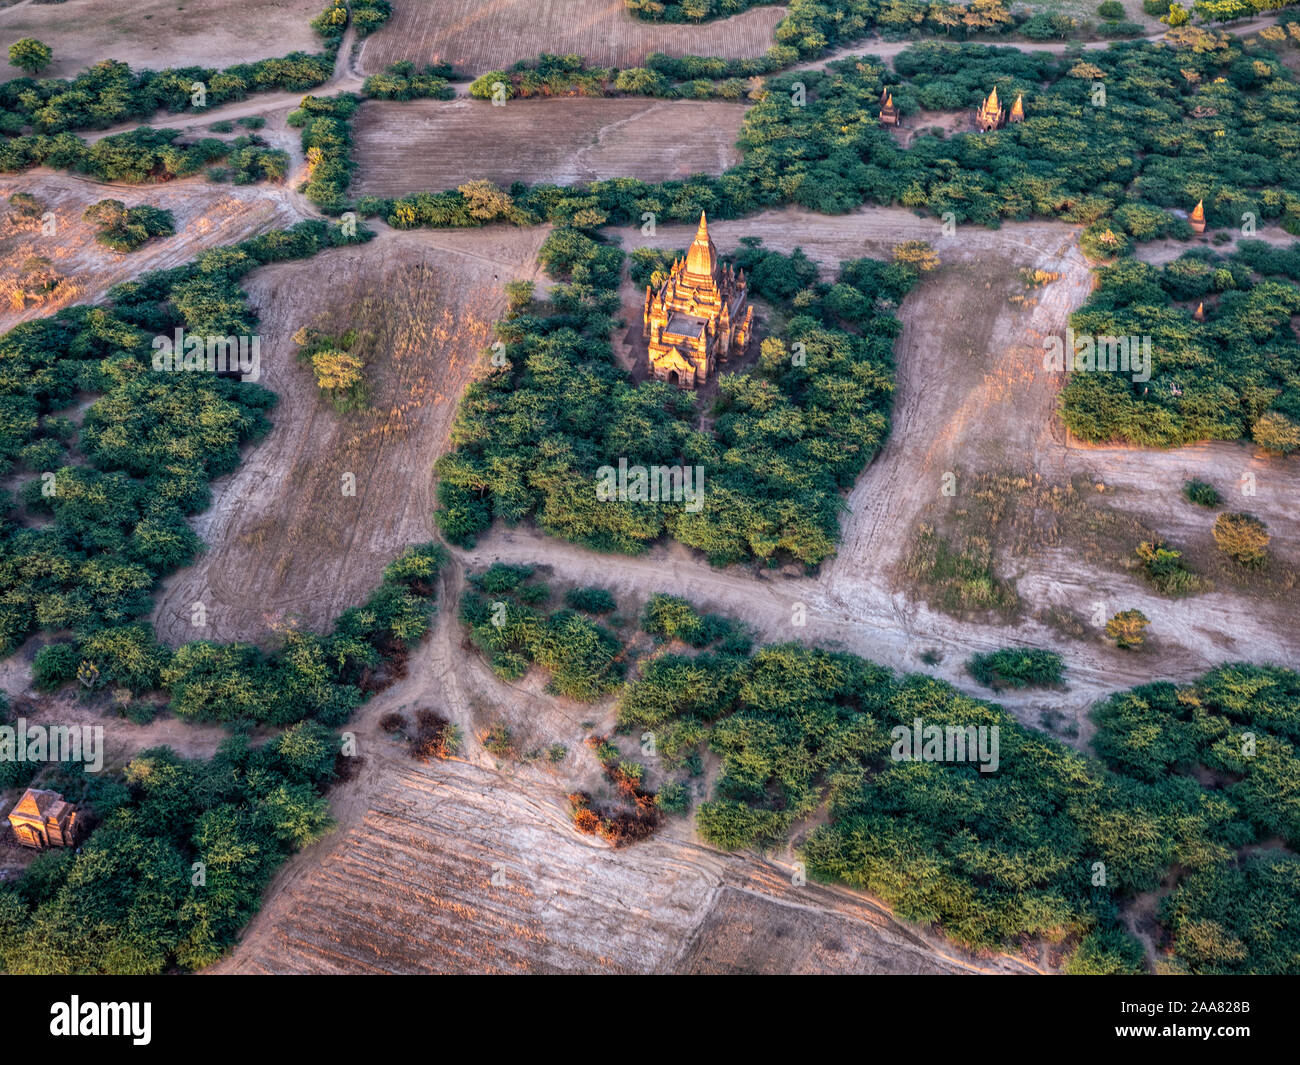 Aerial view of the ancient temples of the archeological zone of Bagan, Myanmar (Burma) as seen from a hot air balloon flying overhead at dawn Stock Photo